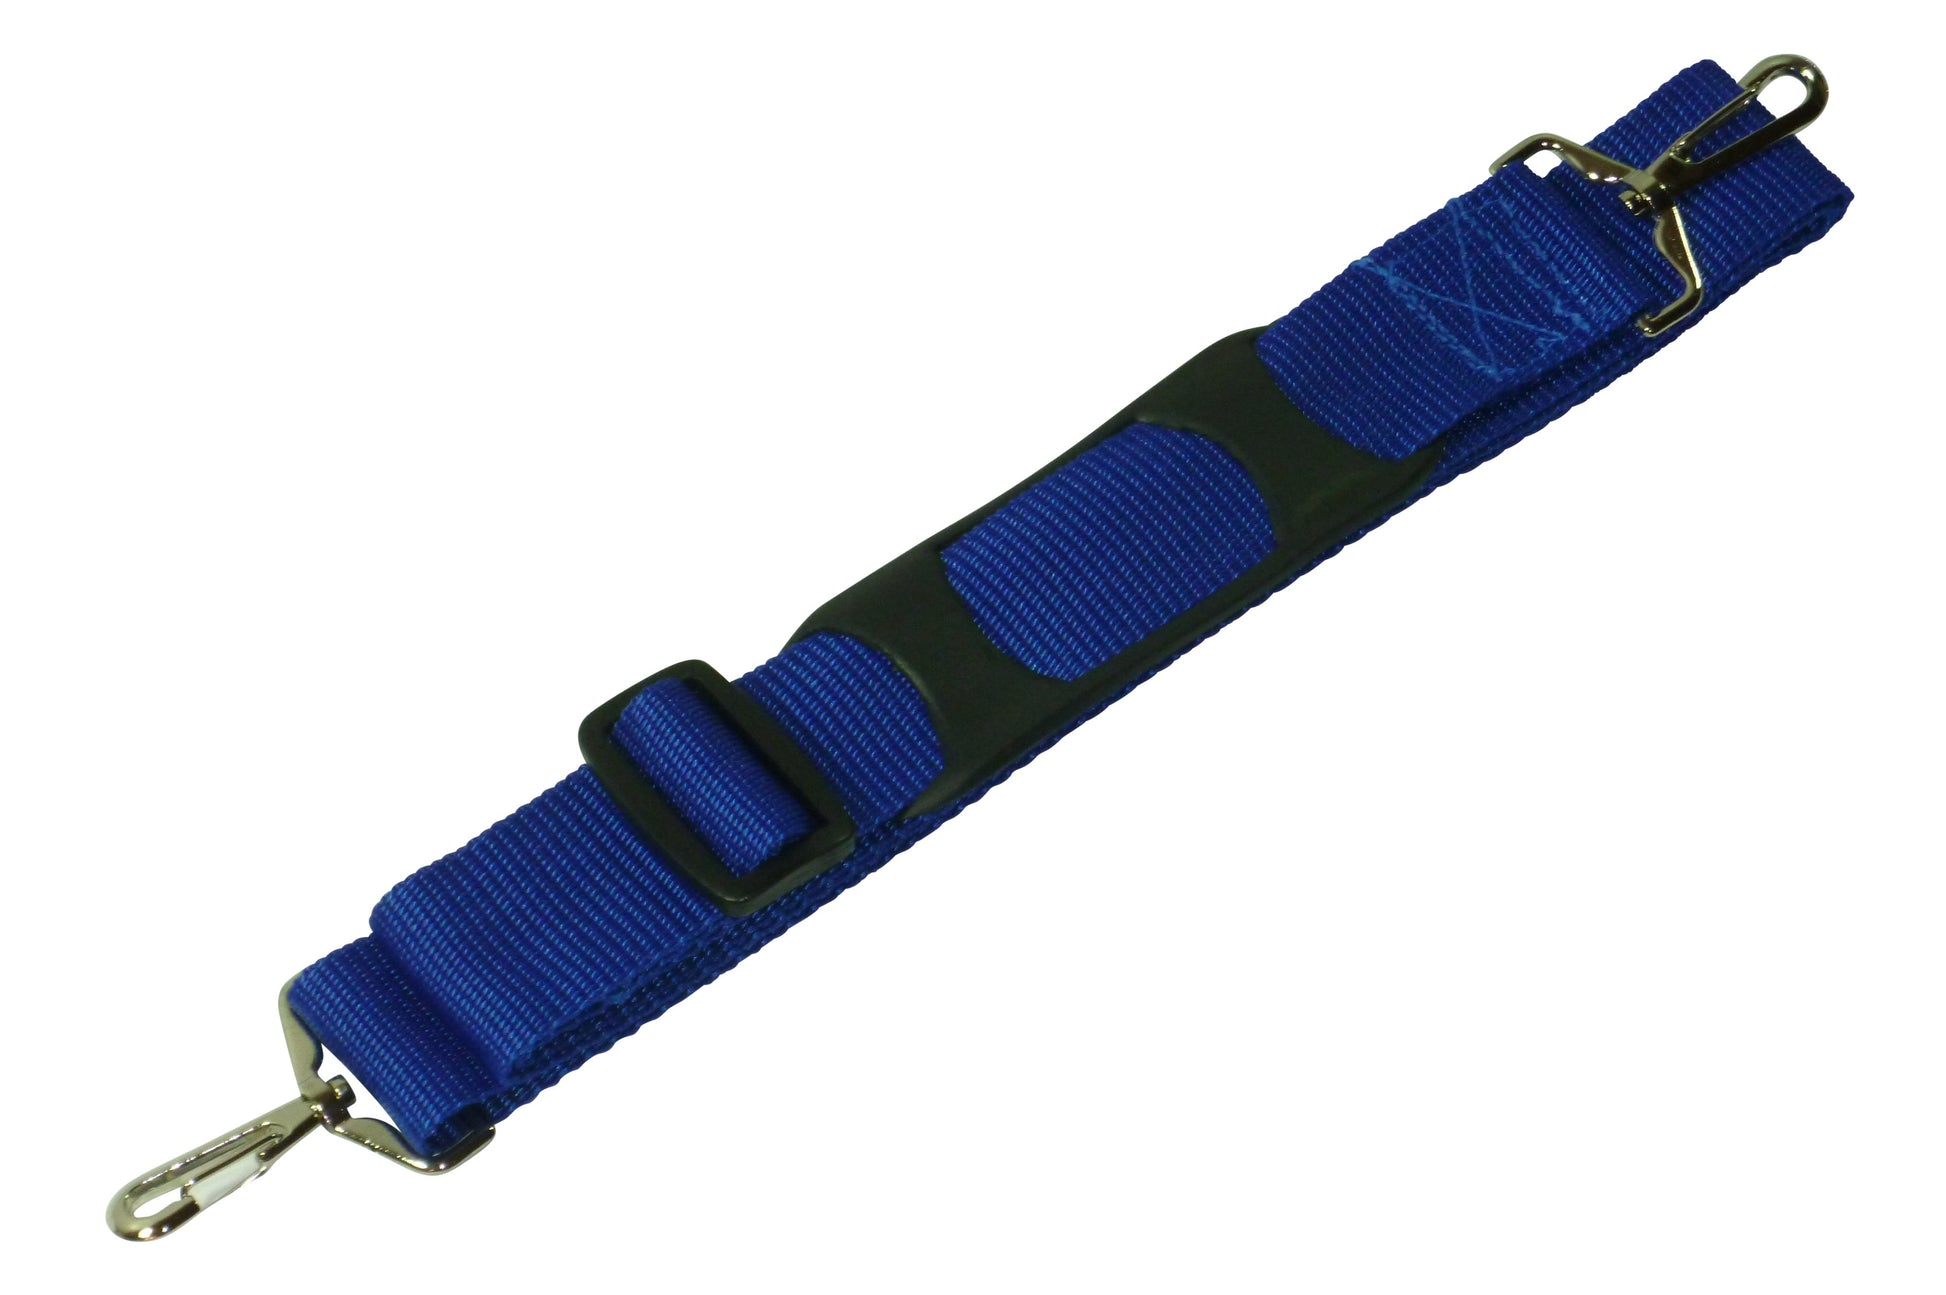 38mm Bag Strap with Metal Buckles and Shoulder Pad, 150cm in blue